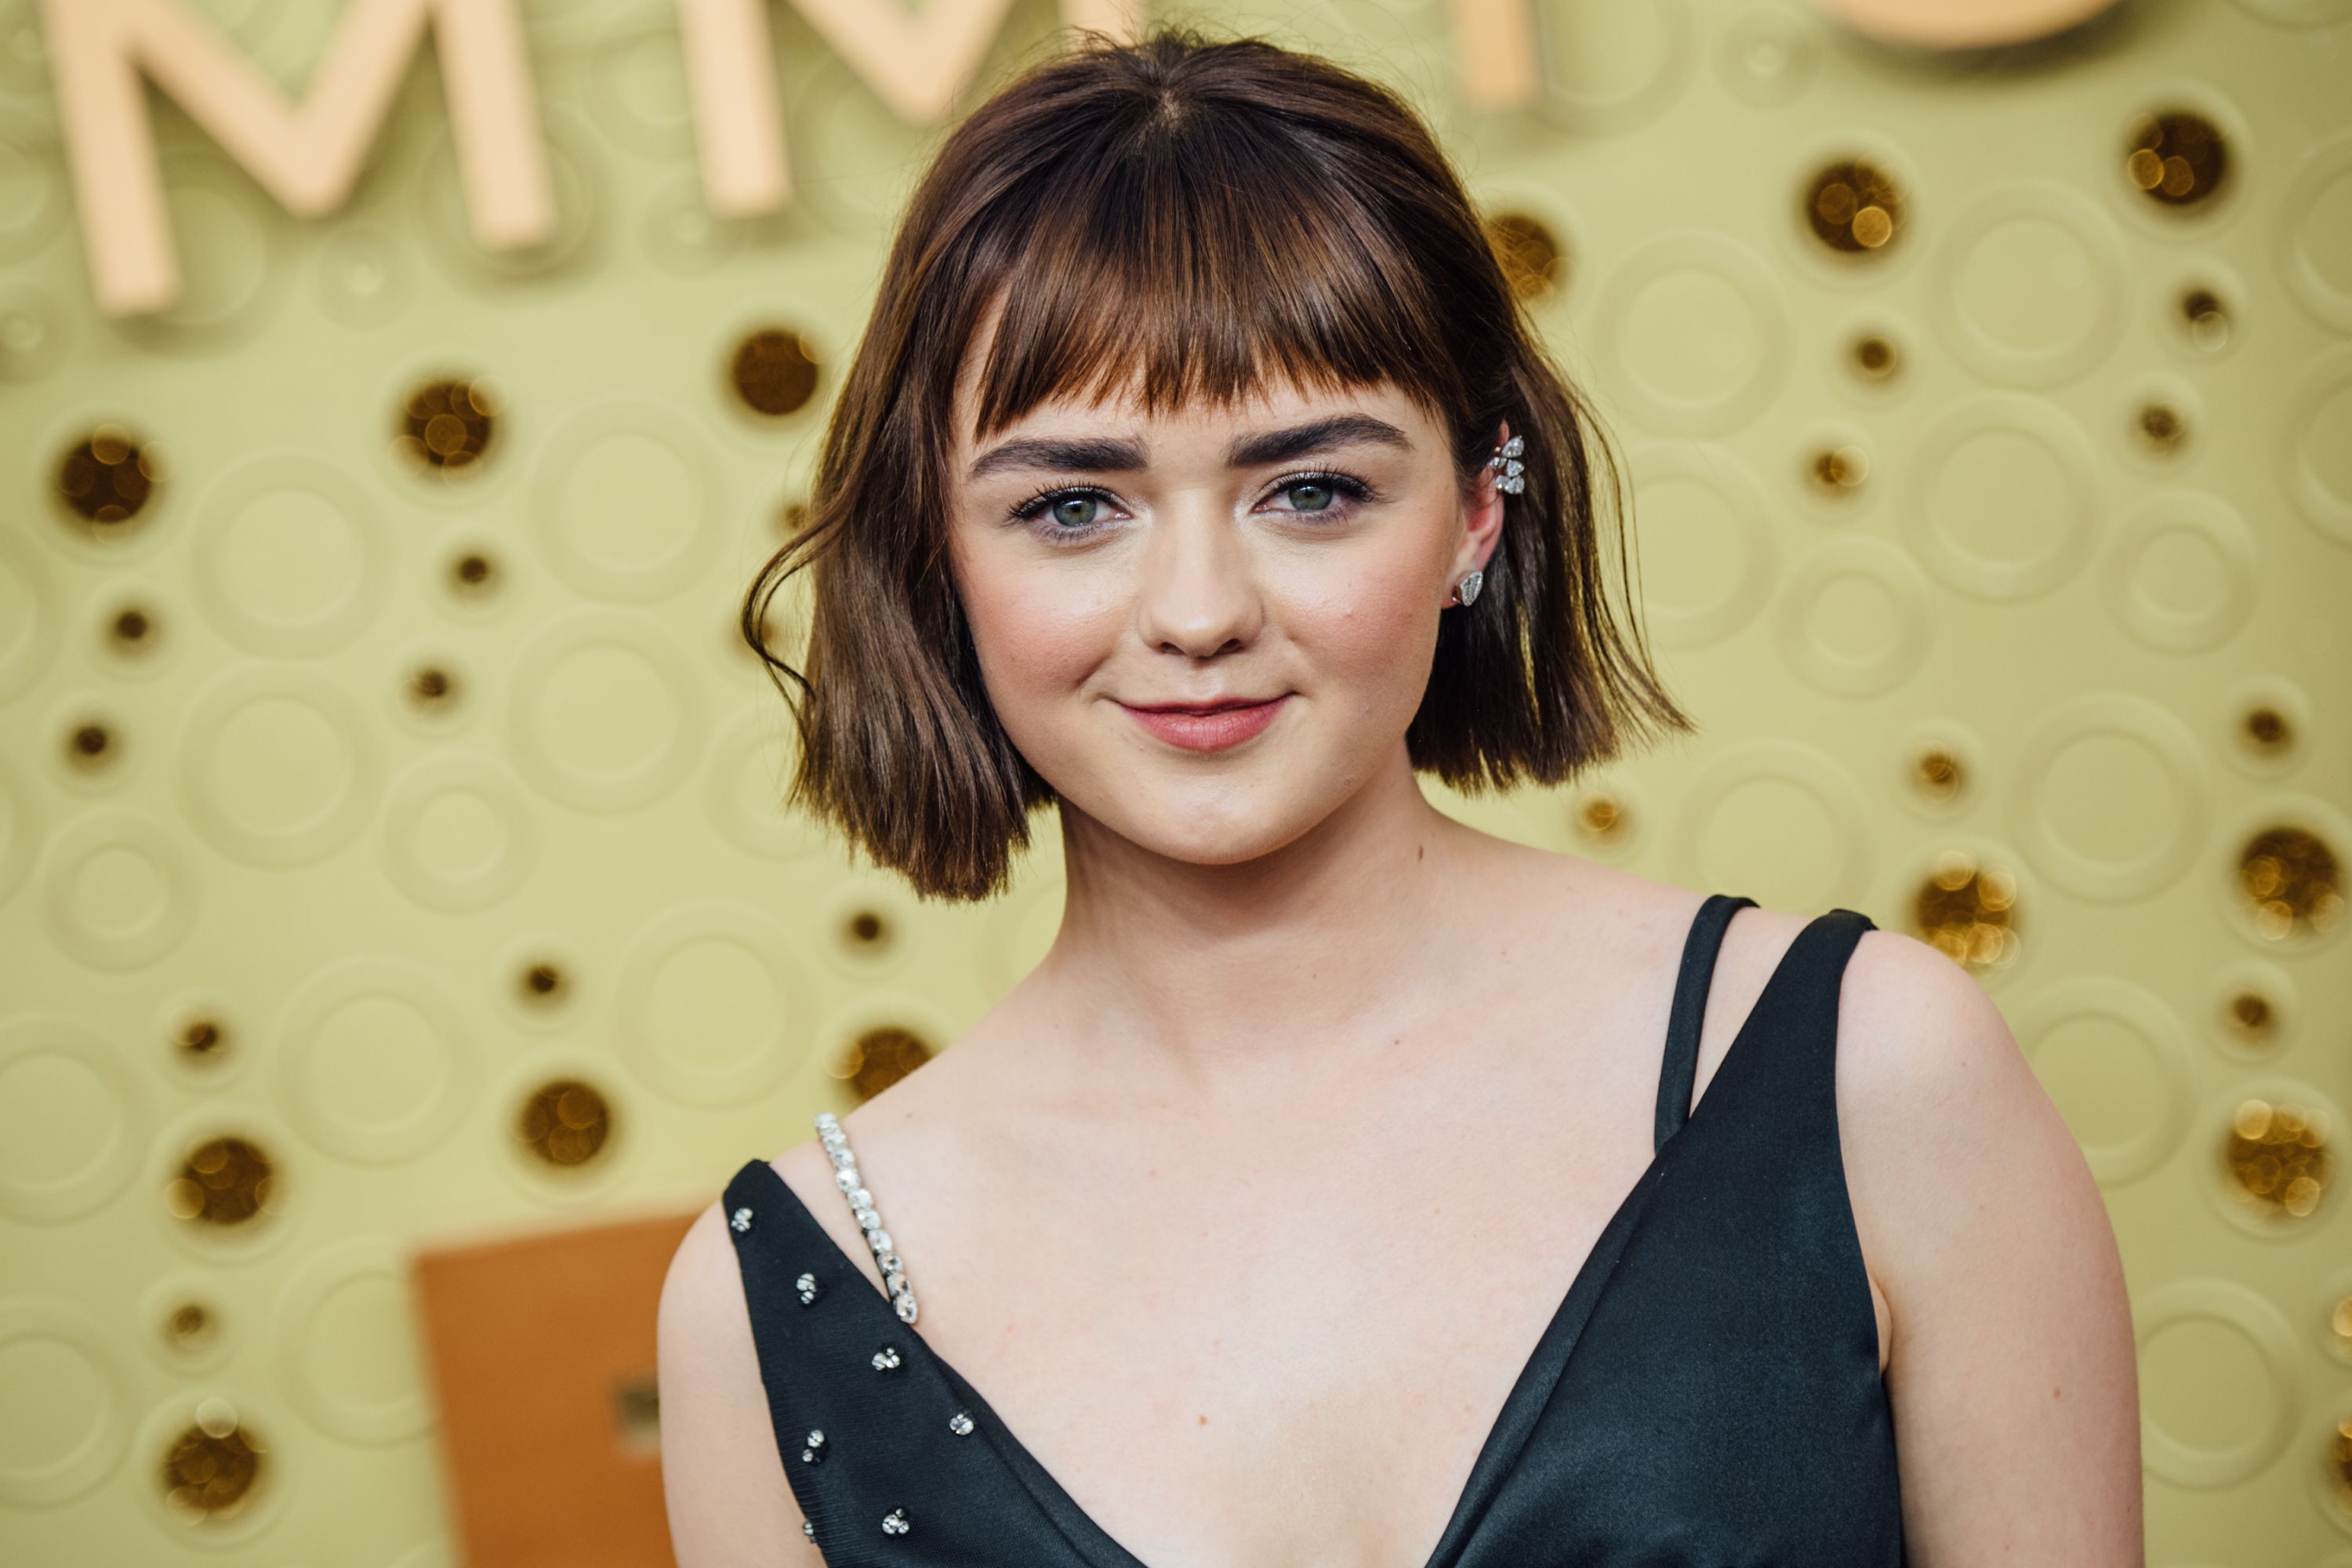 Maisie Williams Debuted A Chic Bob At The 2019 Emmy Awards